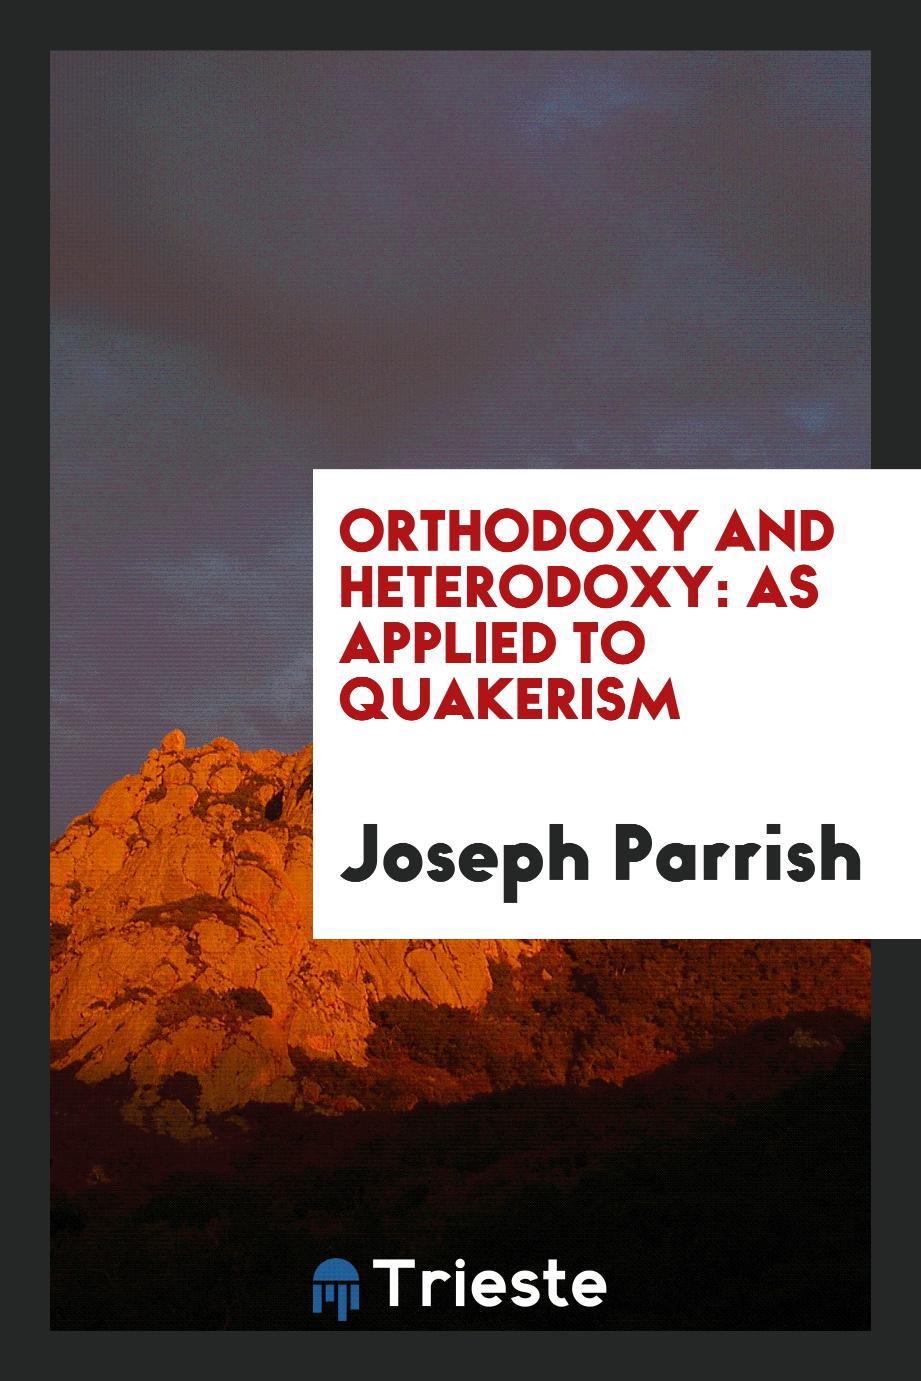 Orthodoxy and Heterodoxy: As Applied to Quakerism